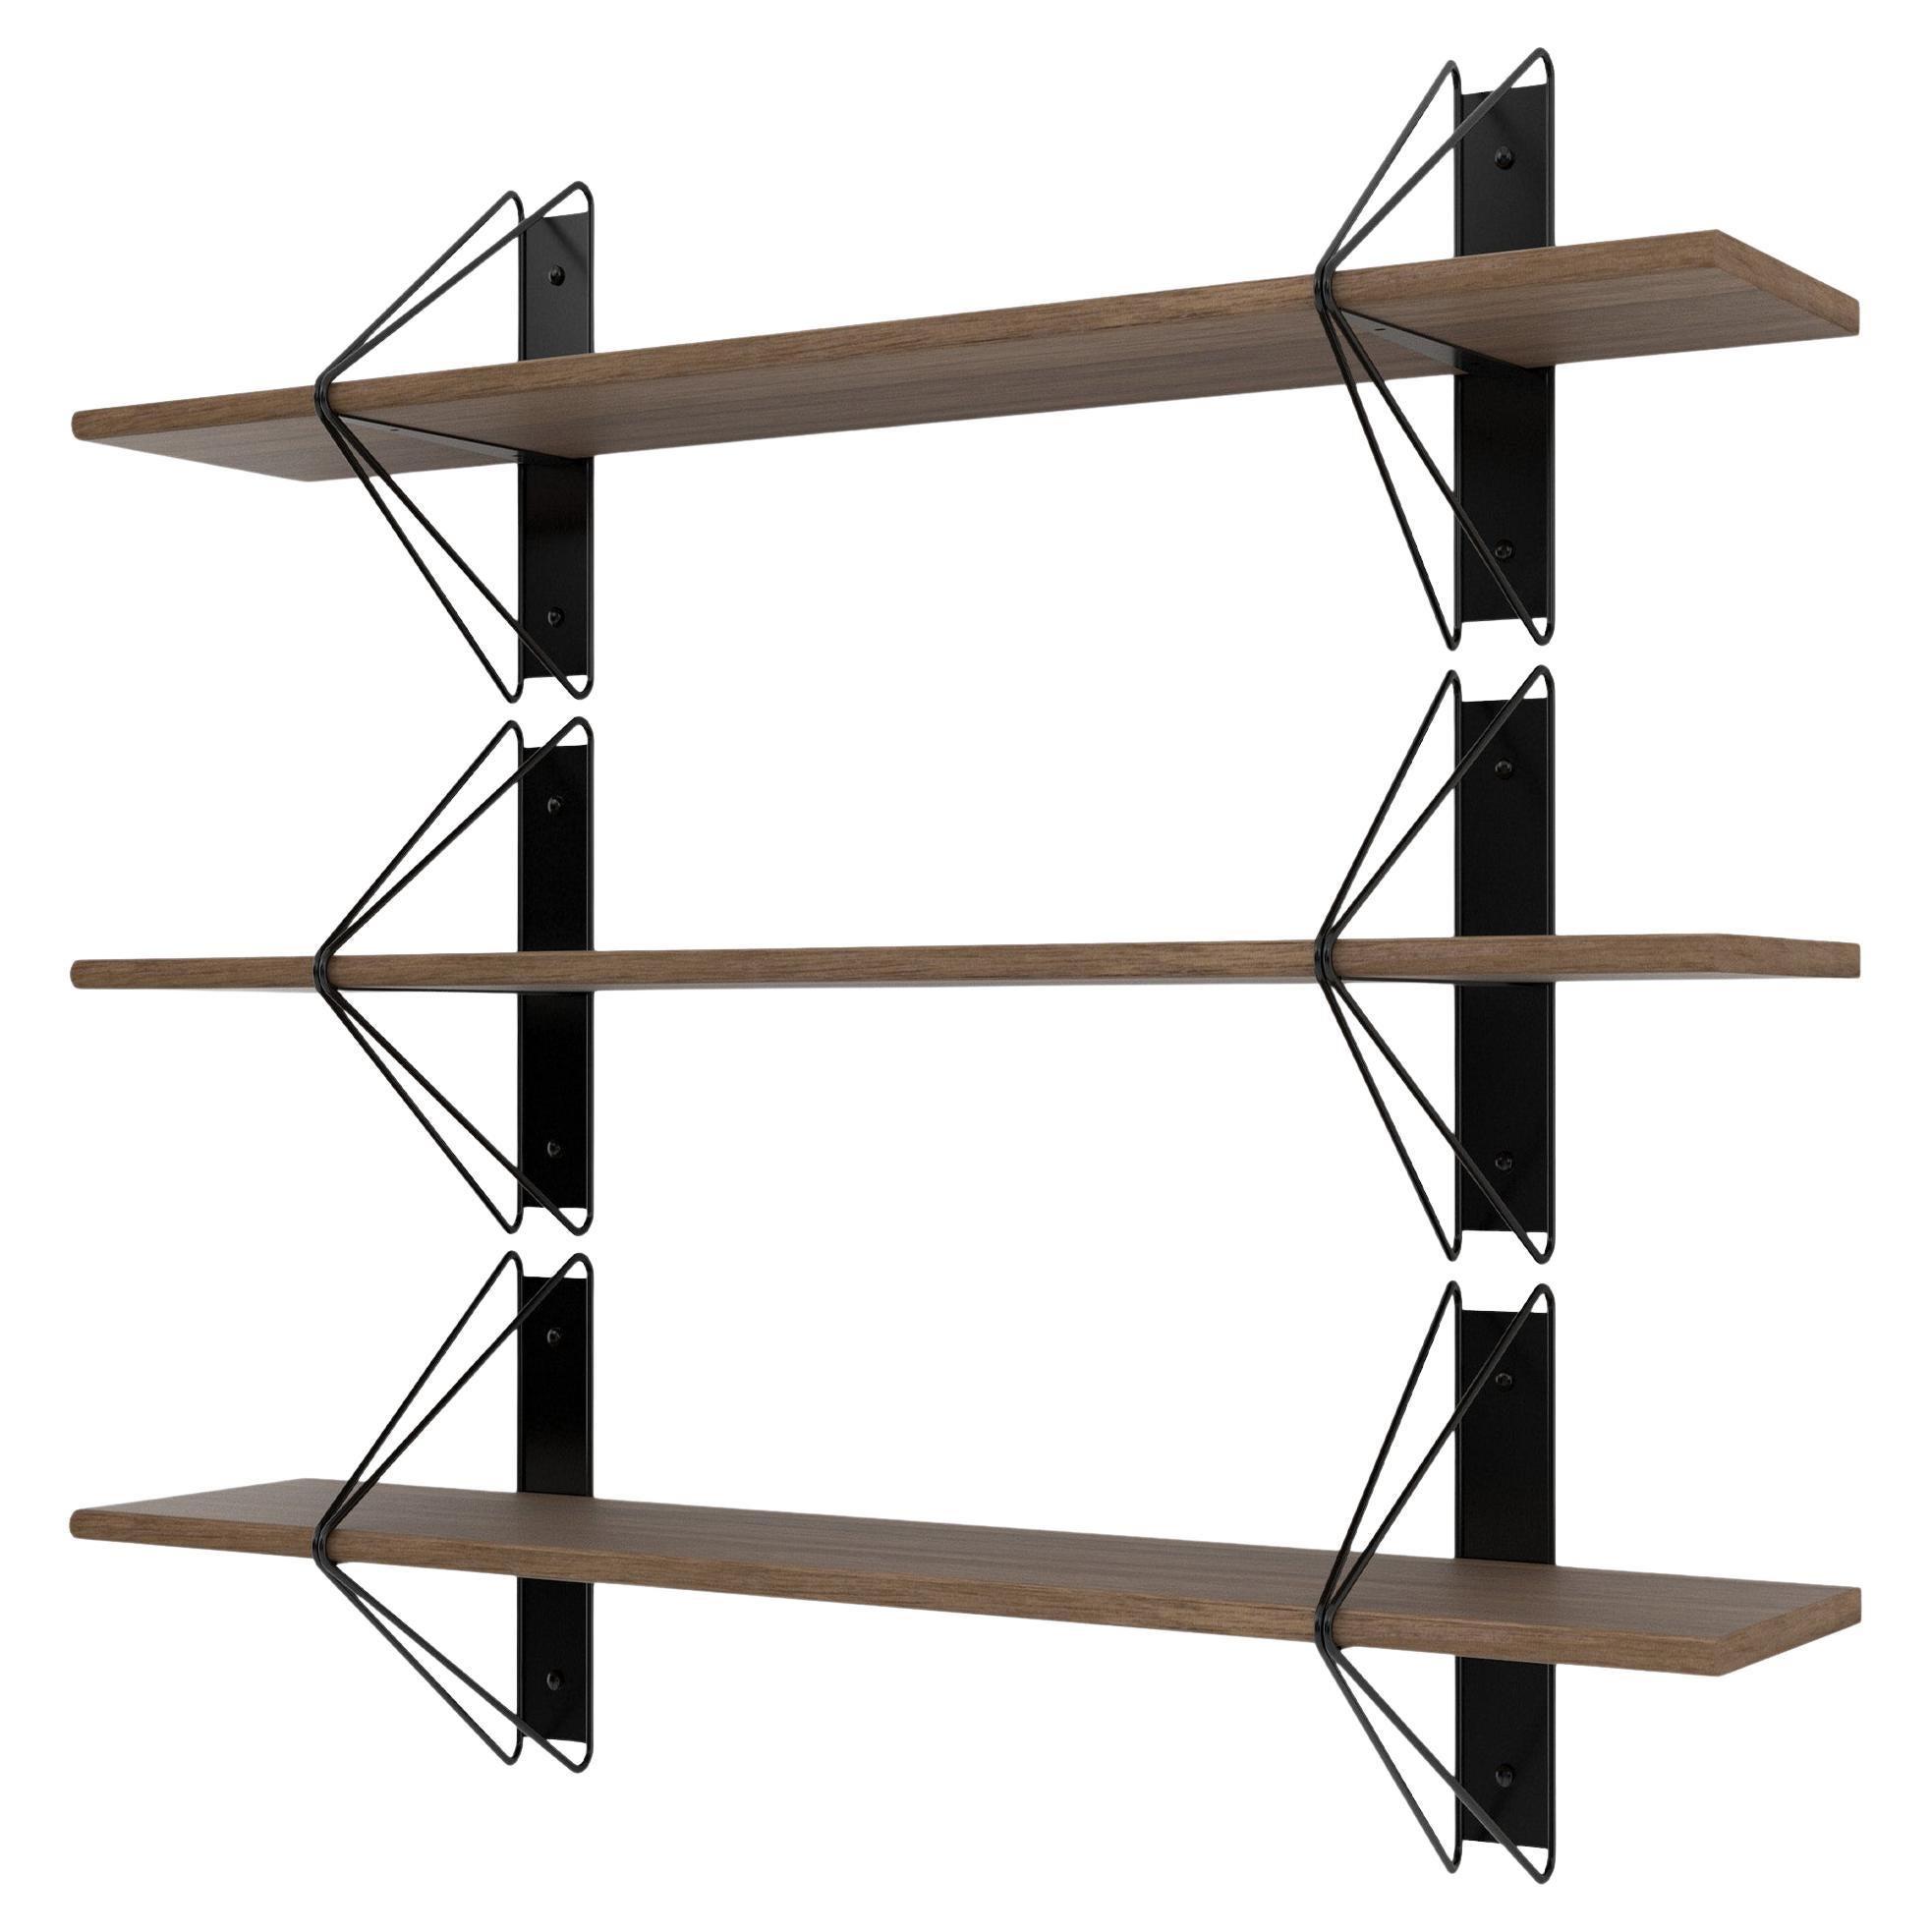 Set of 3 Strut Shelves from Souda, 52in, Black and Walnut, Made to Order For Sale